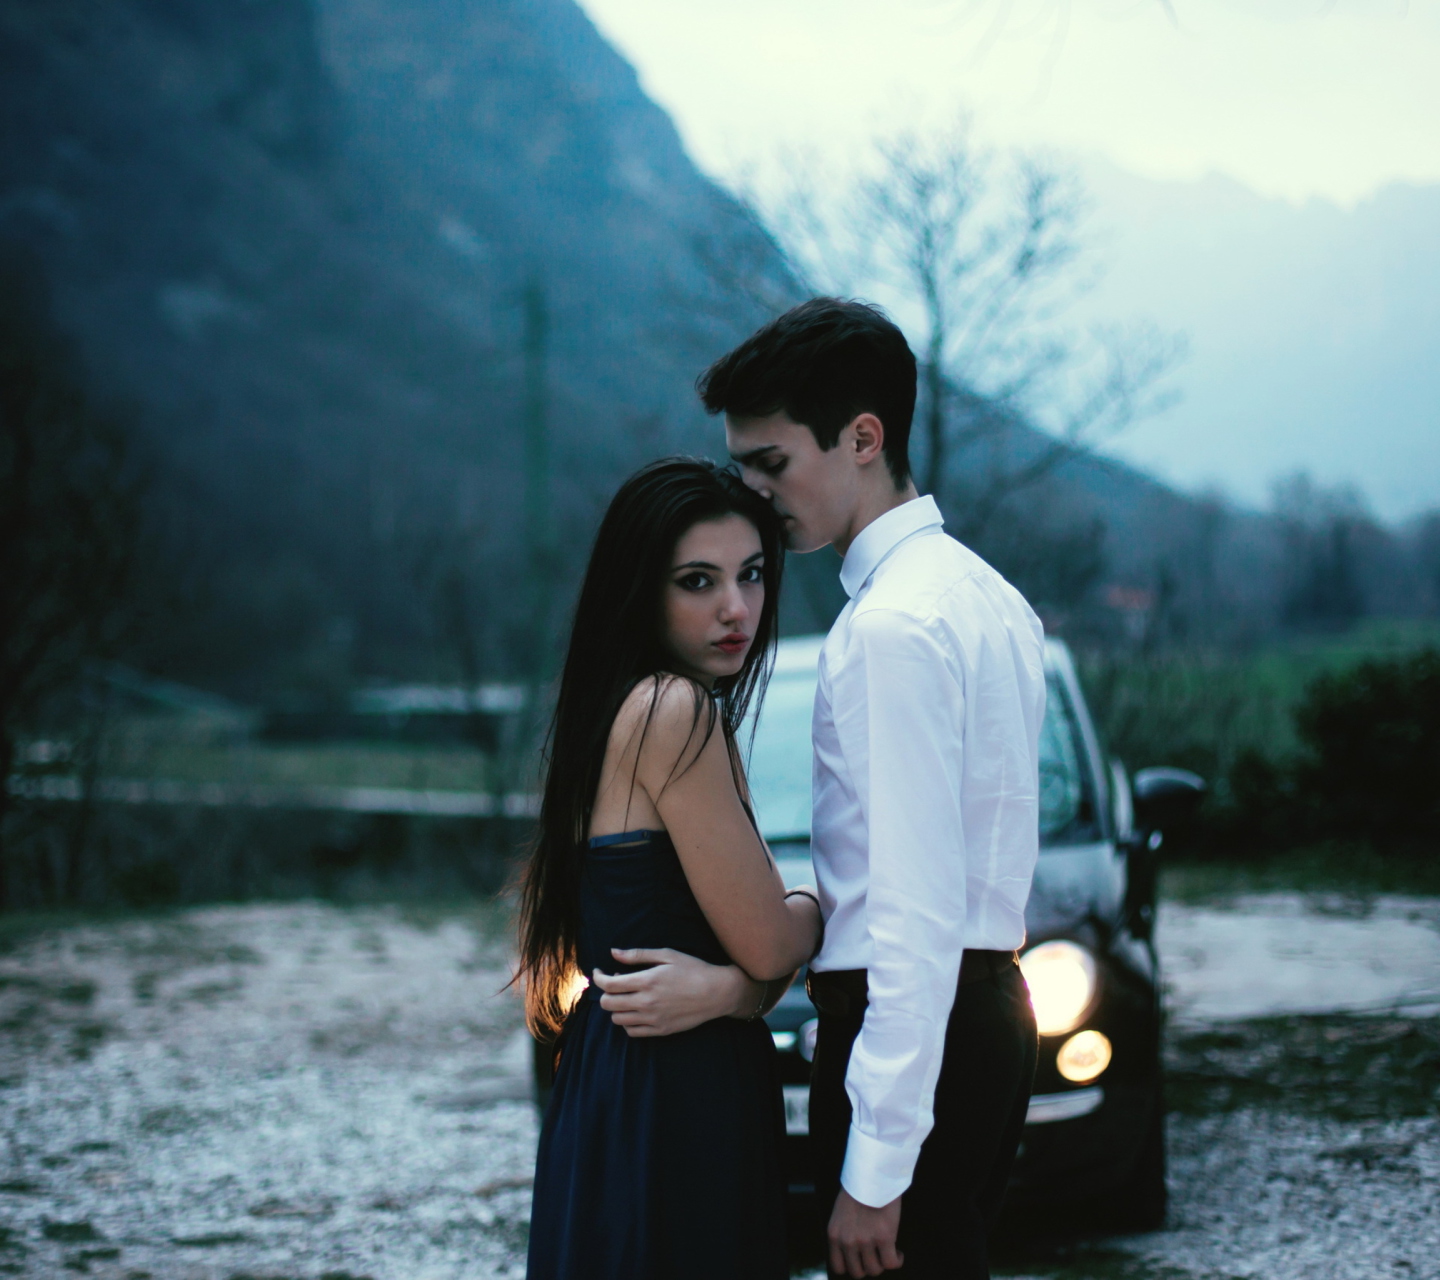 Couple In Front Of Car screenshot #1 1440x1280